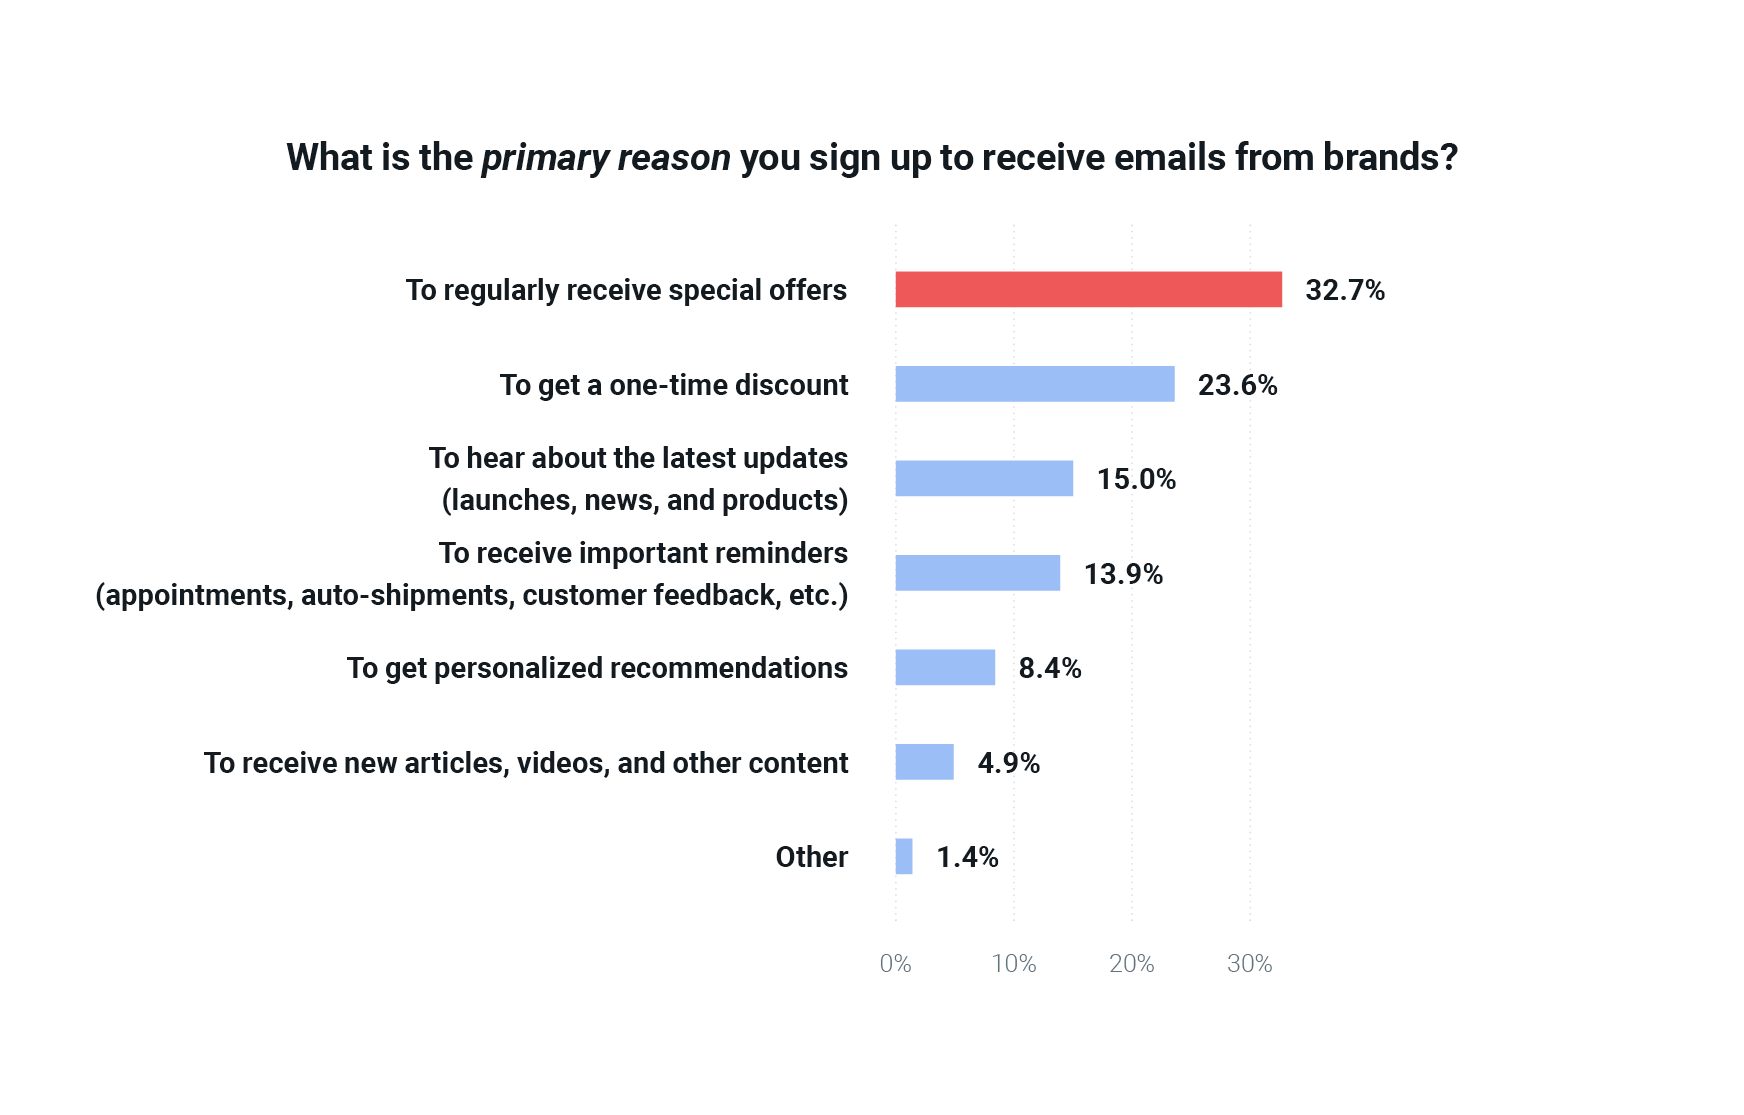 Chart on reasons why consumers sign up for emails